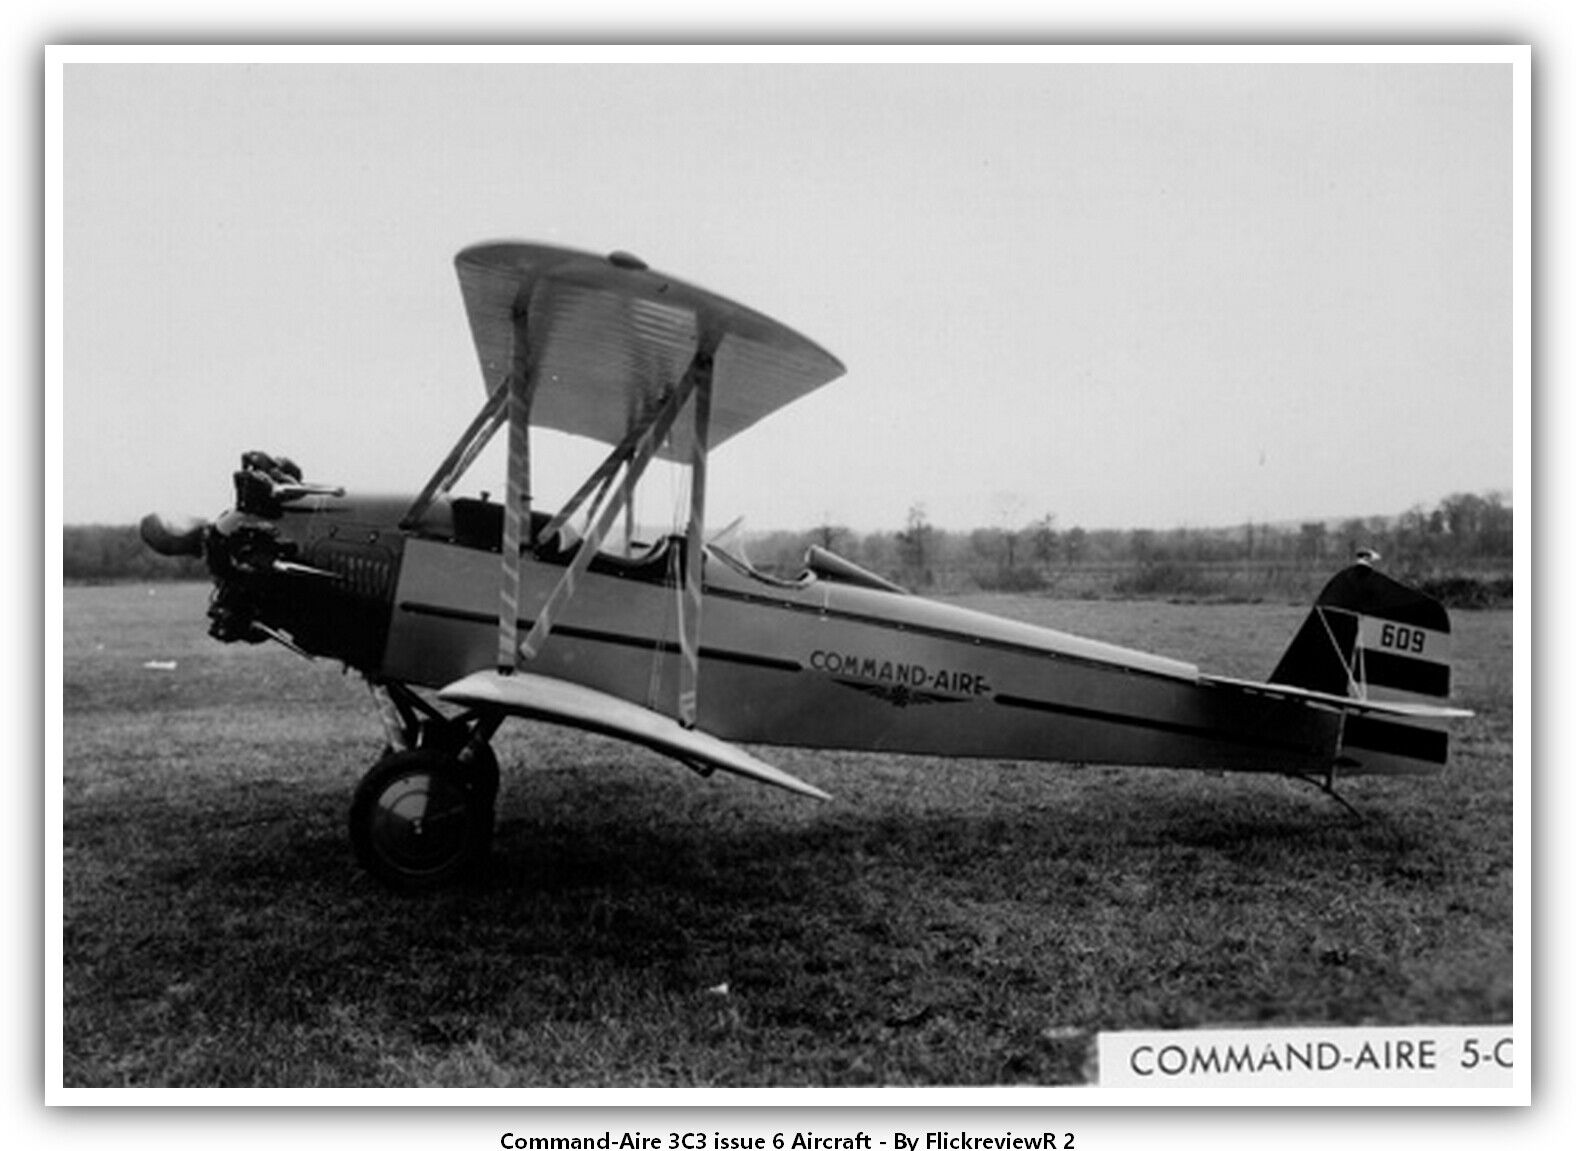 Command-Aire 3C3 issue 6 Aircraft